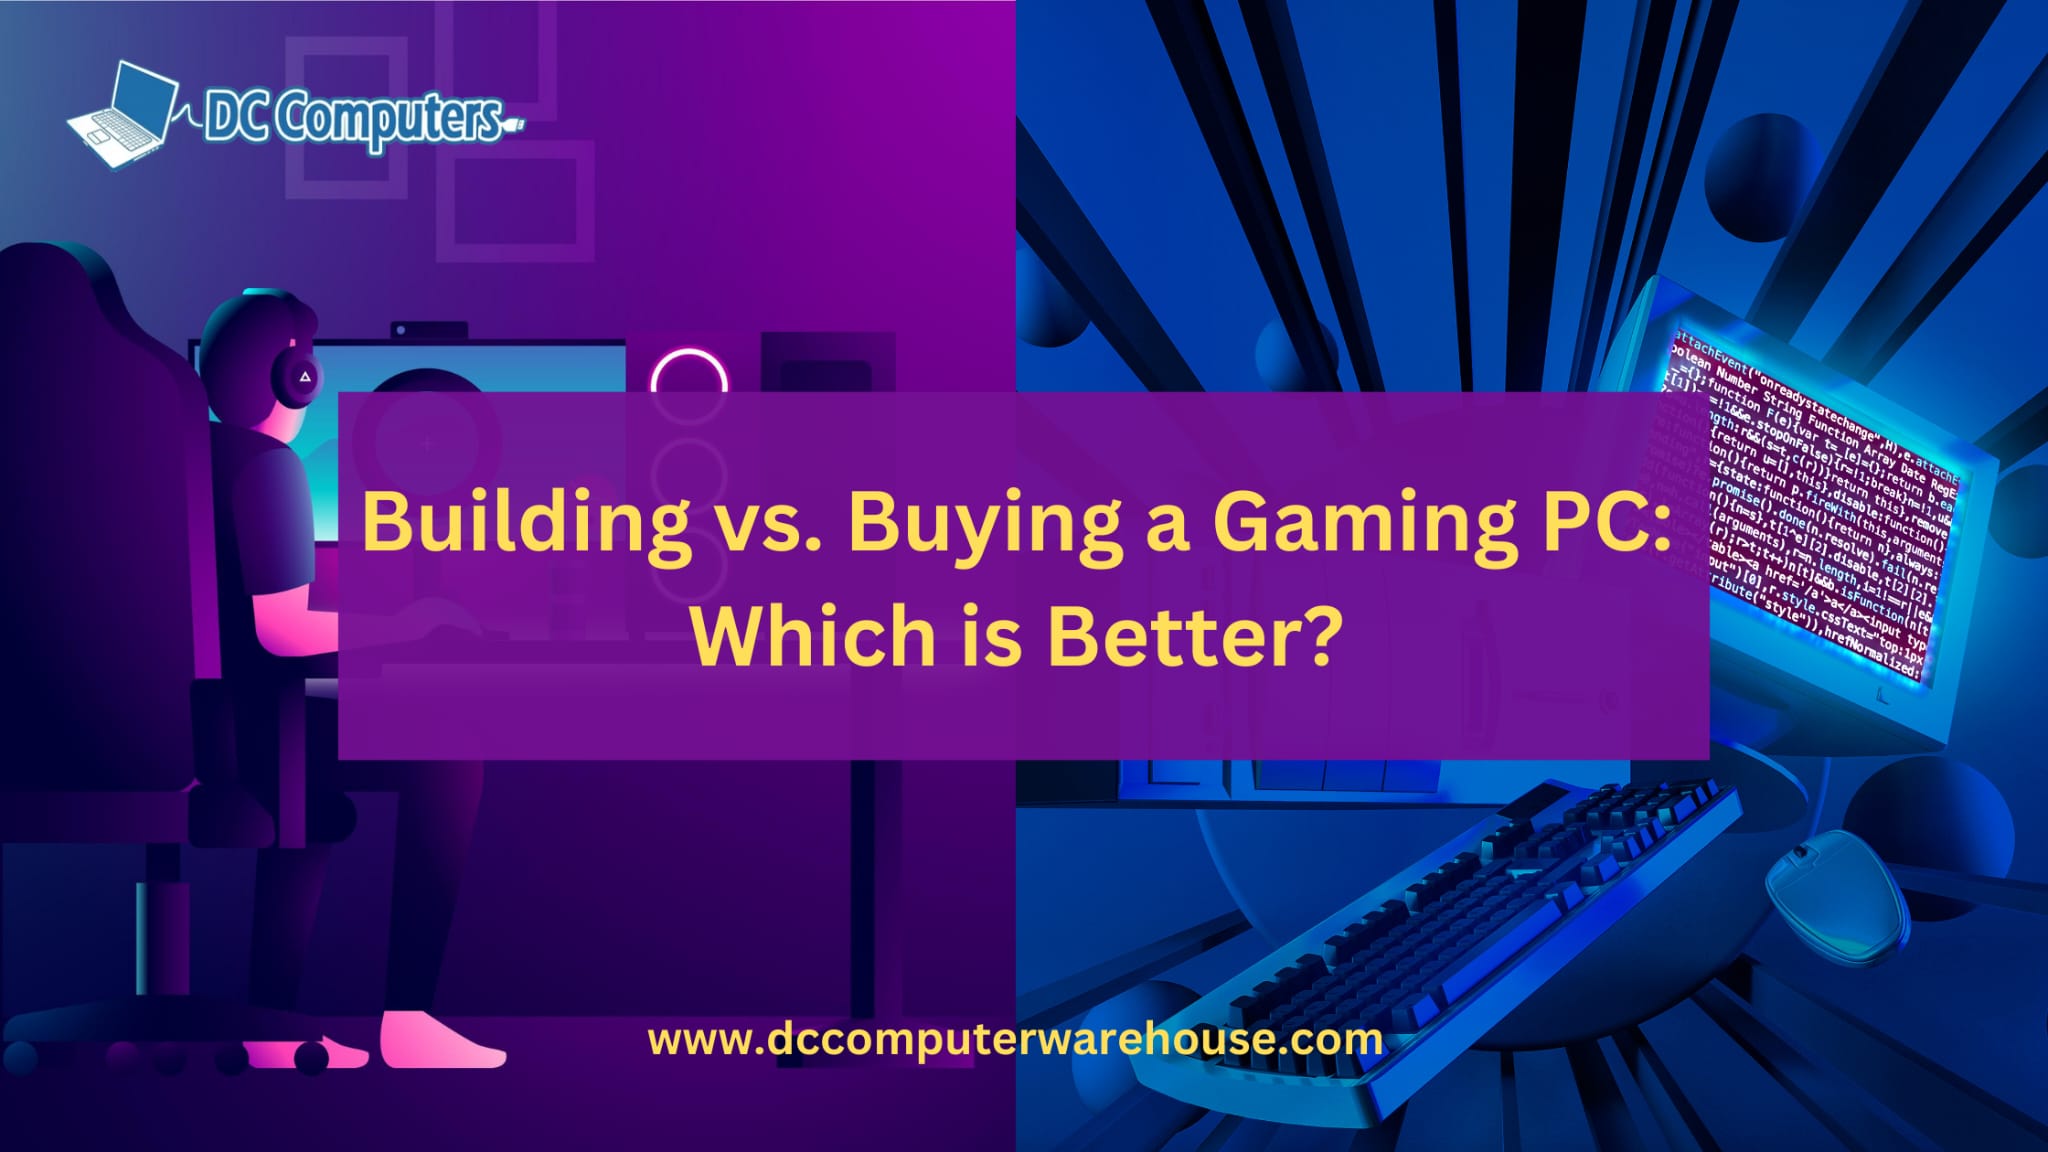 Building vs. Buying a Gaming PC: Which is Better?